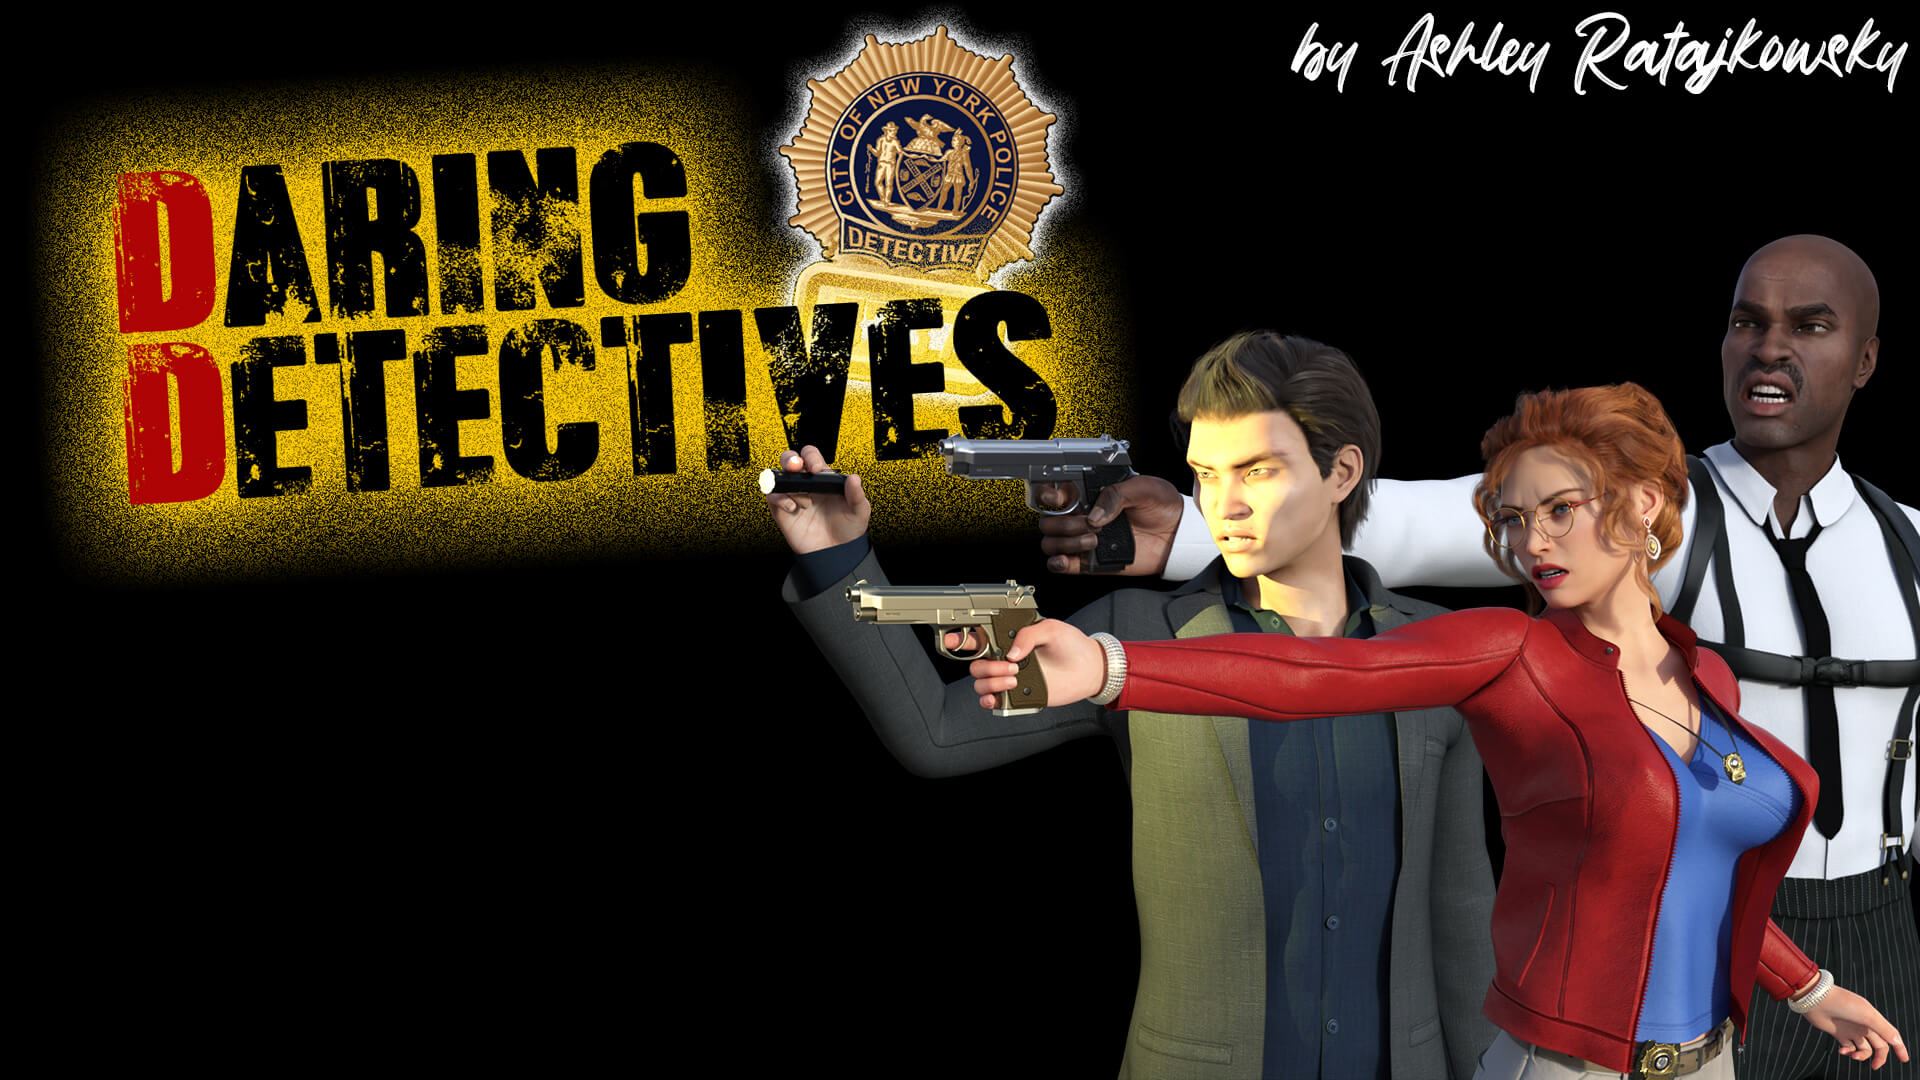 Daring Detectives A New Life porn xxx game download cover